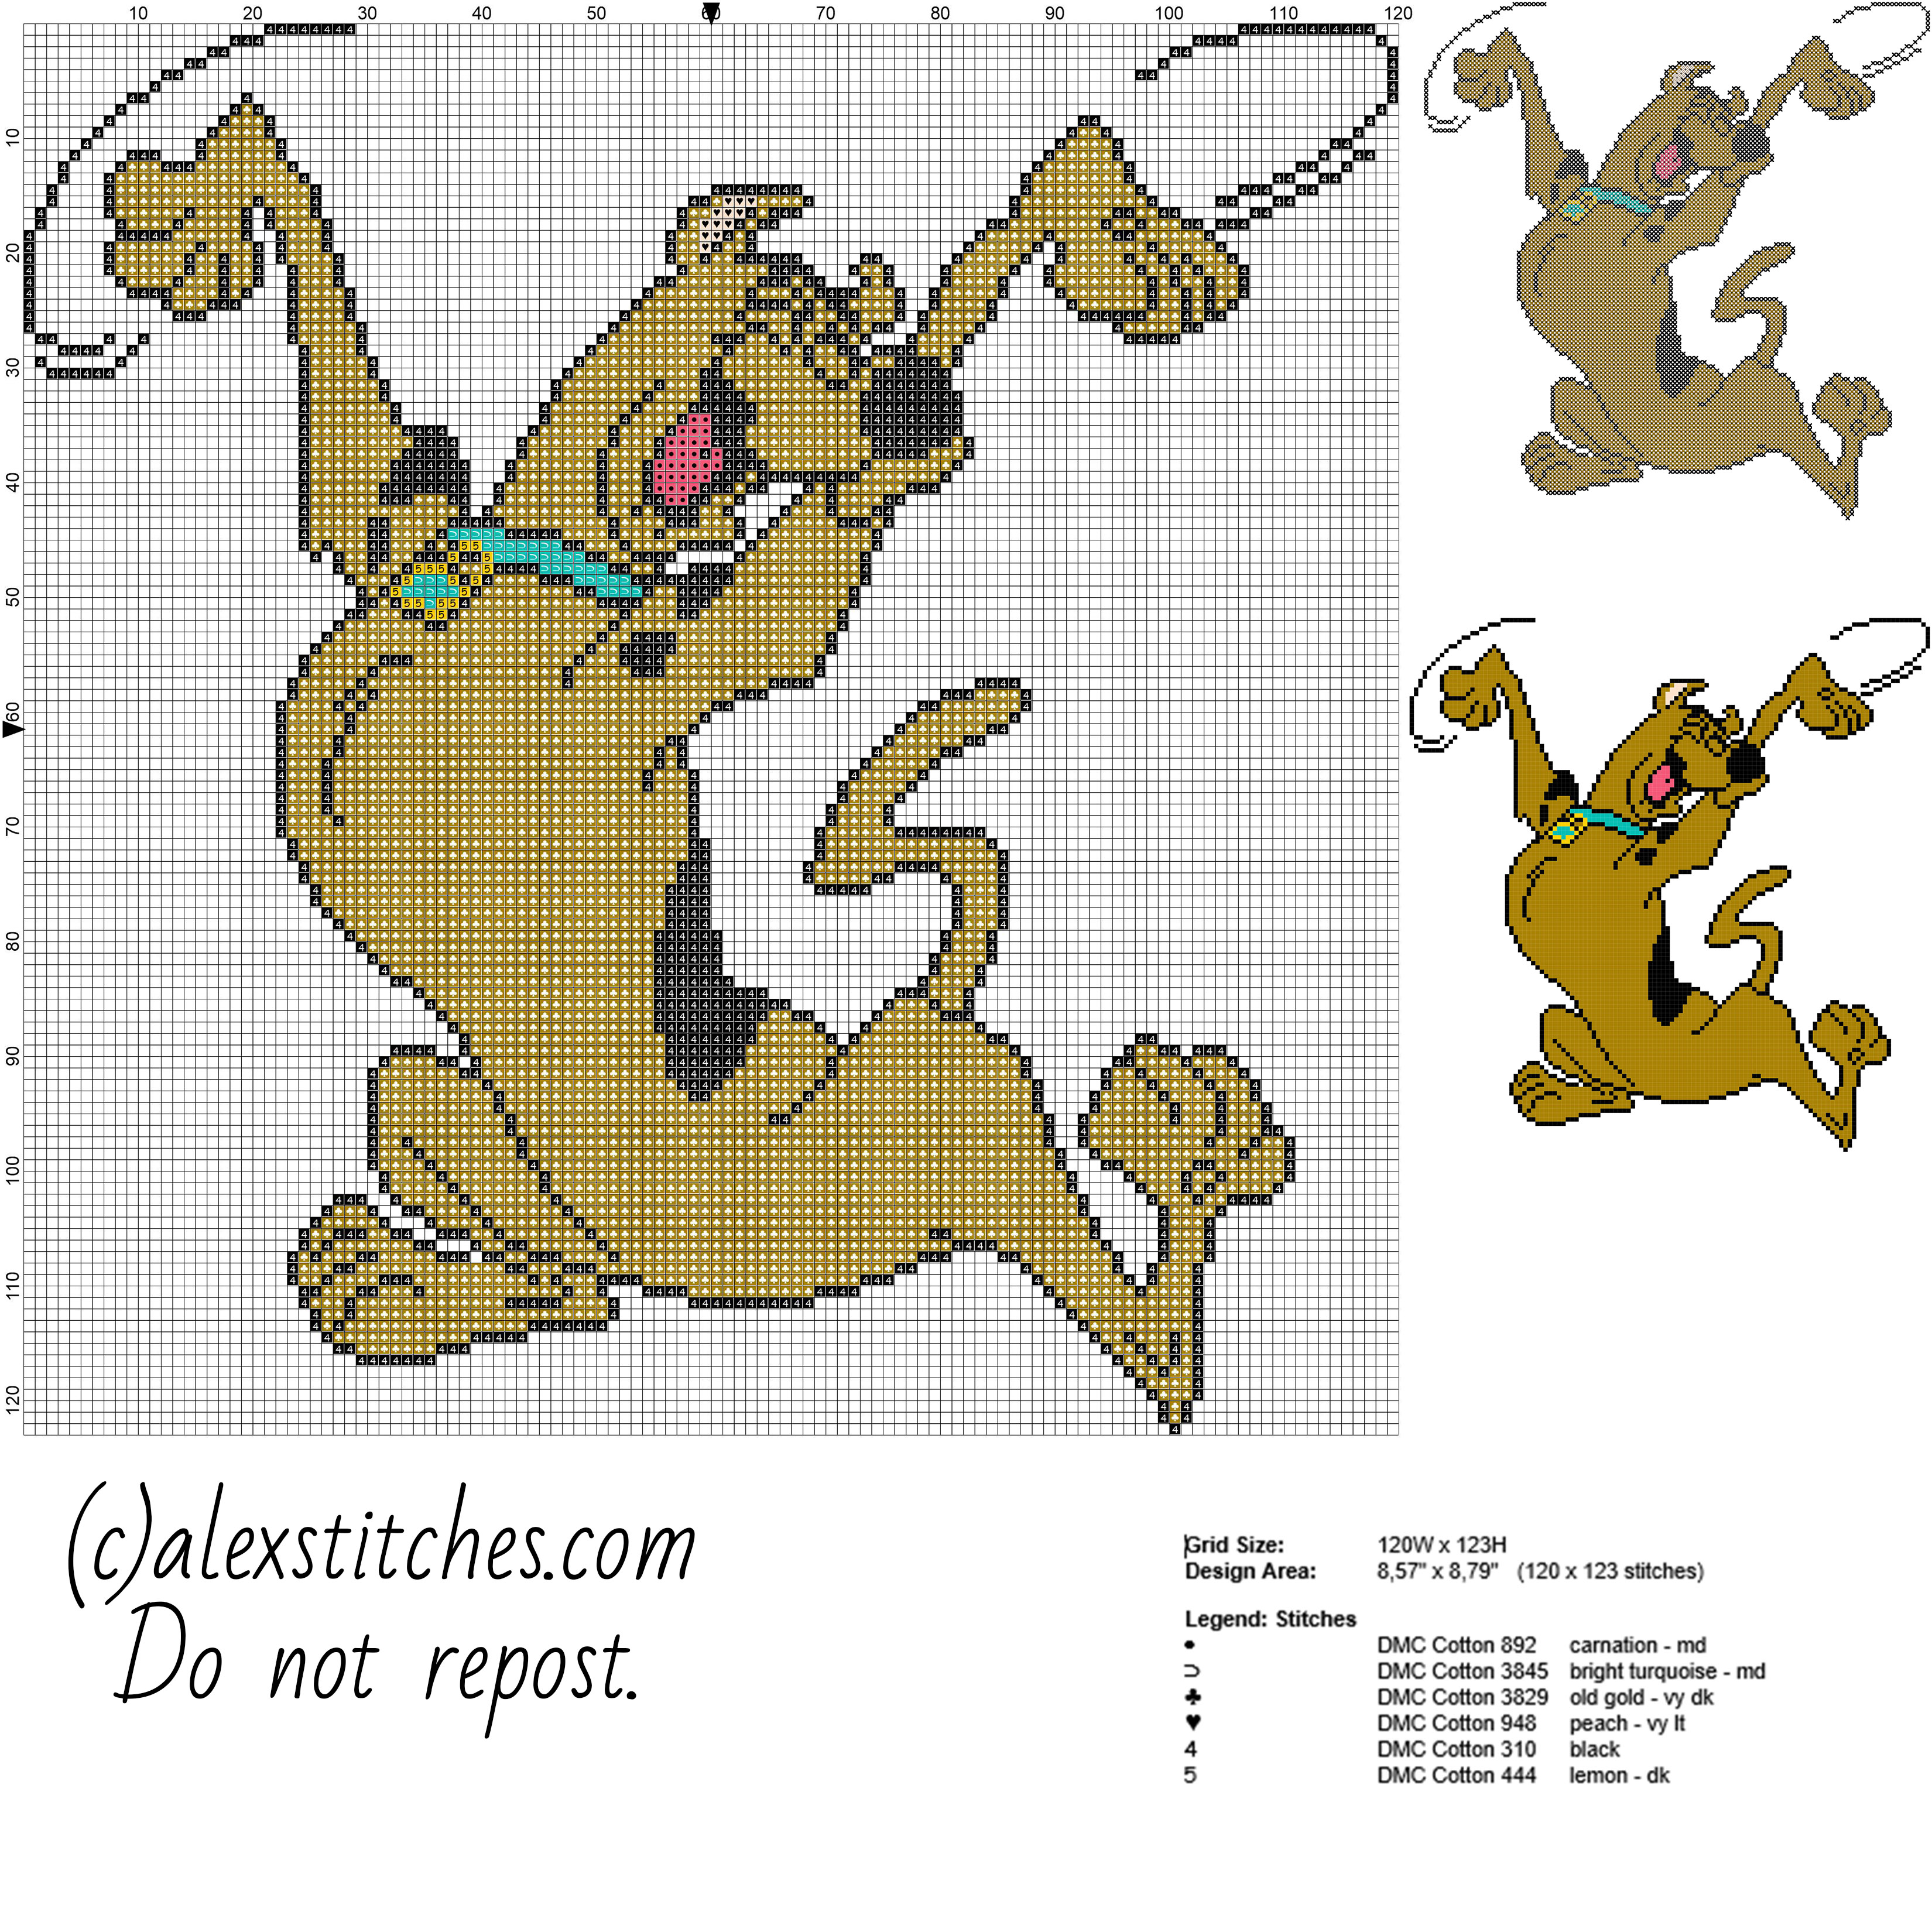 Scooby Doo character from cartoon Scooby Doo free cross stitch pattern